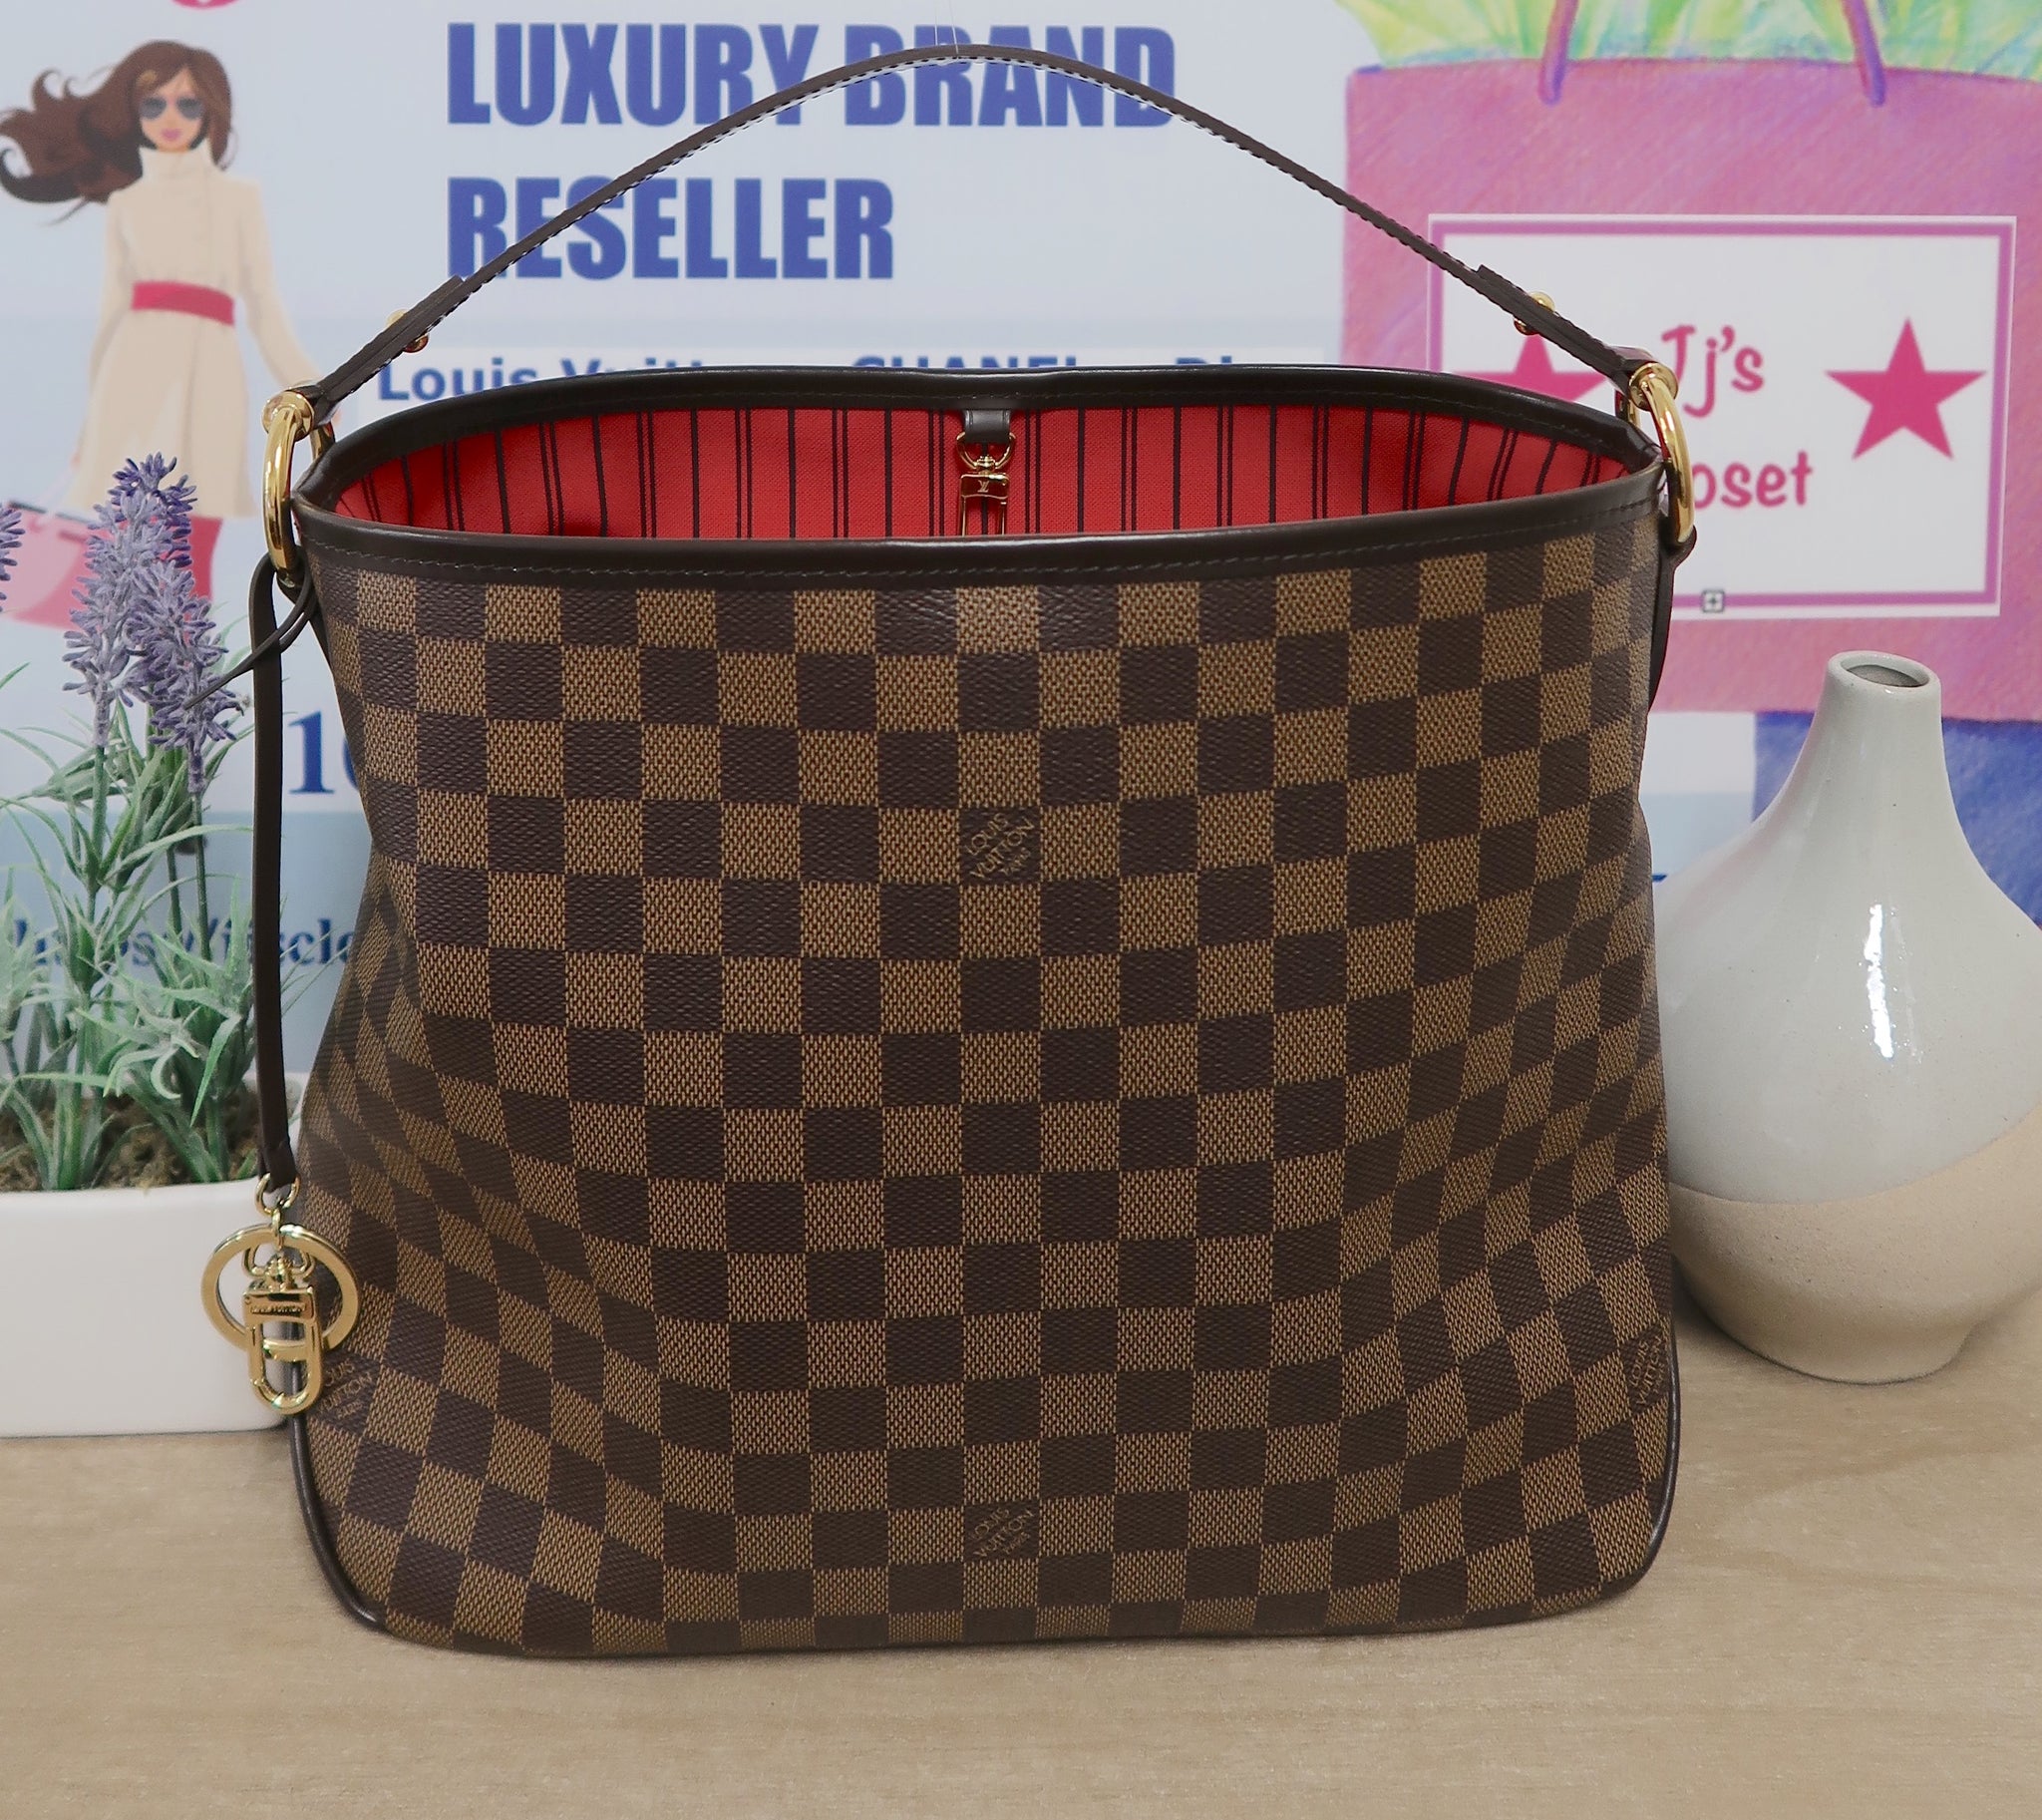 Louis Vuitton - Authenticated Delightful Handbag - Leather Brown for Women, Very Good Condition